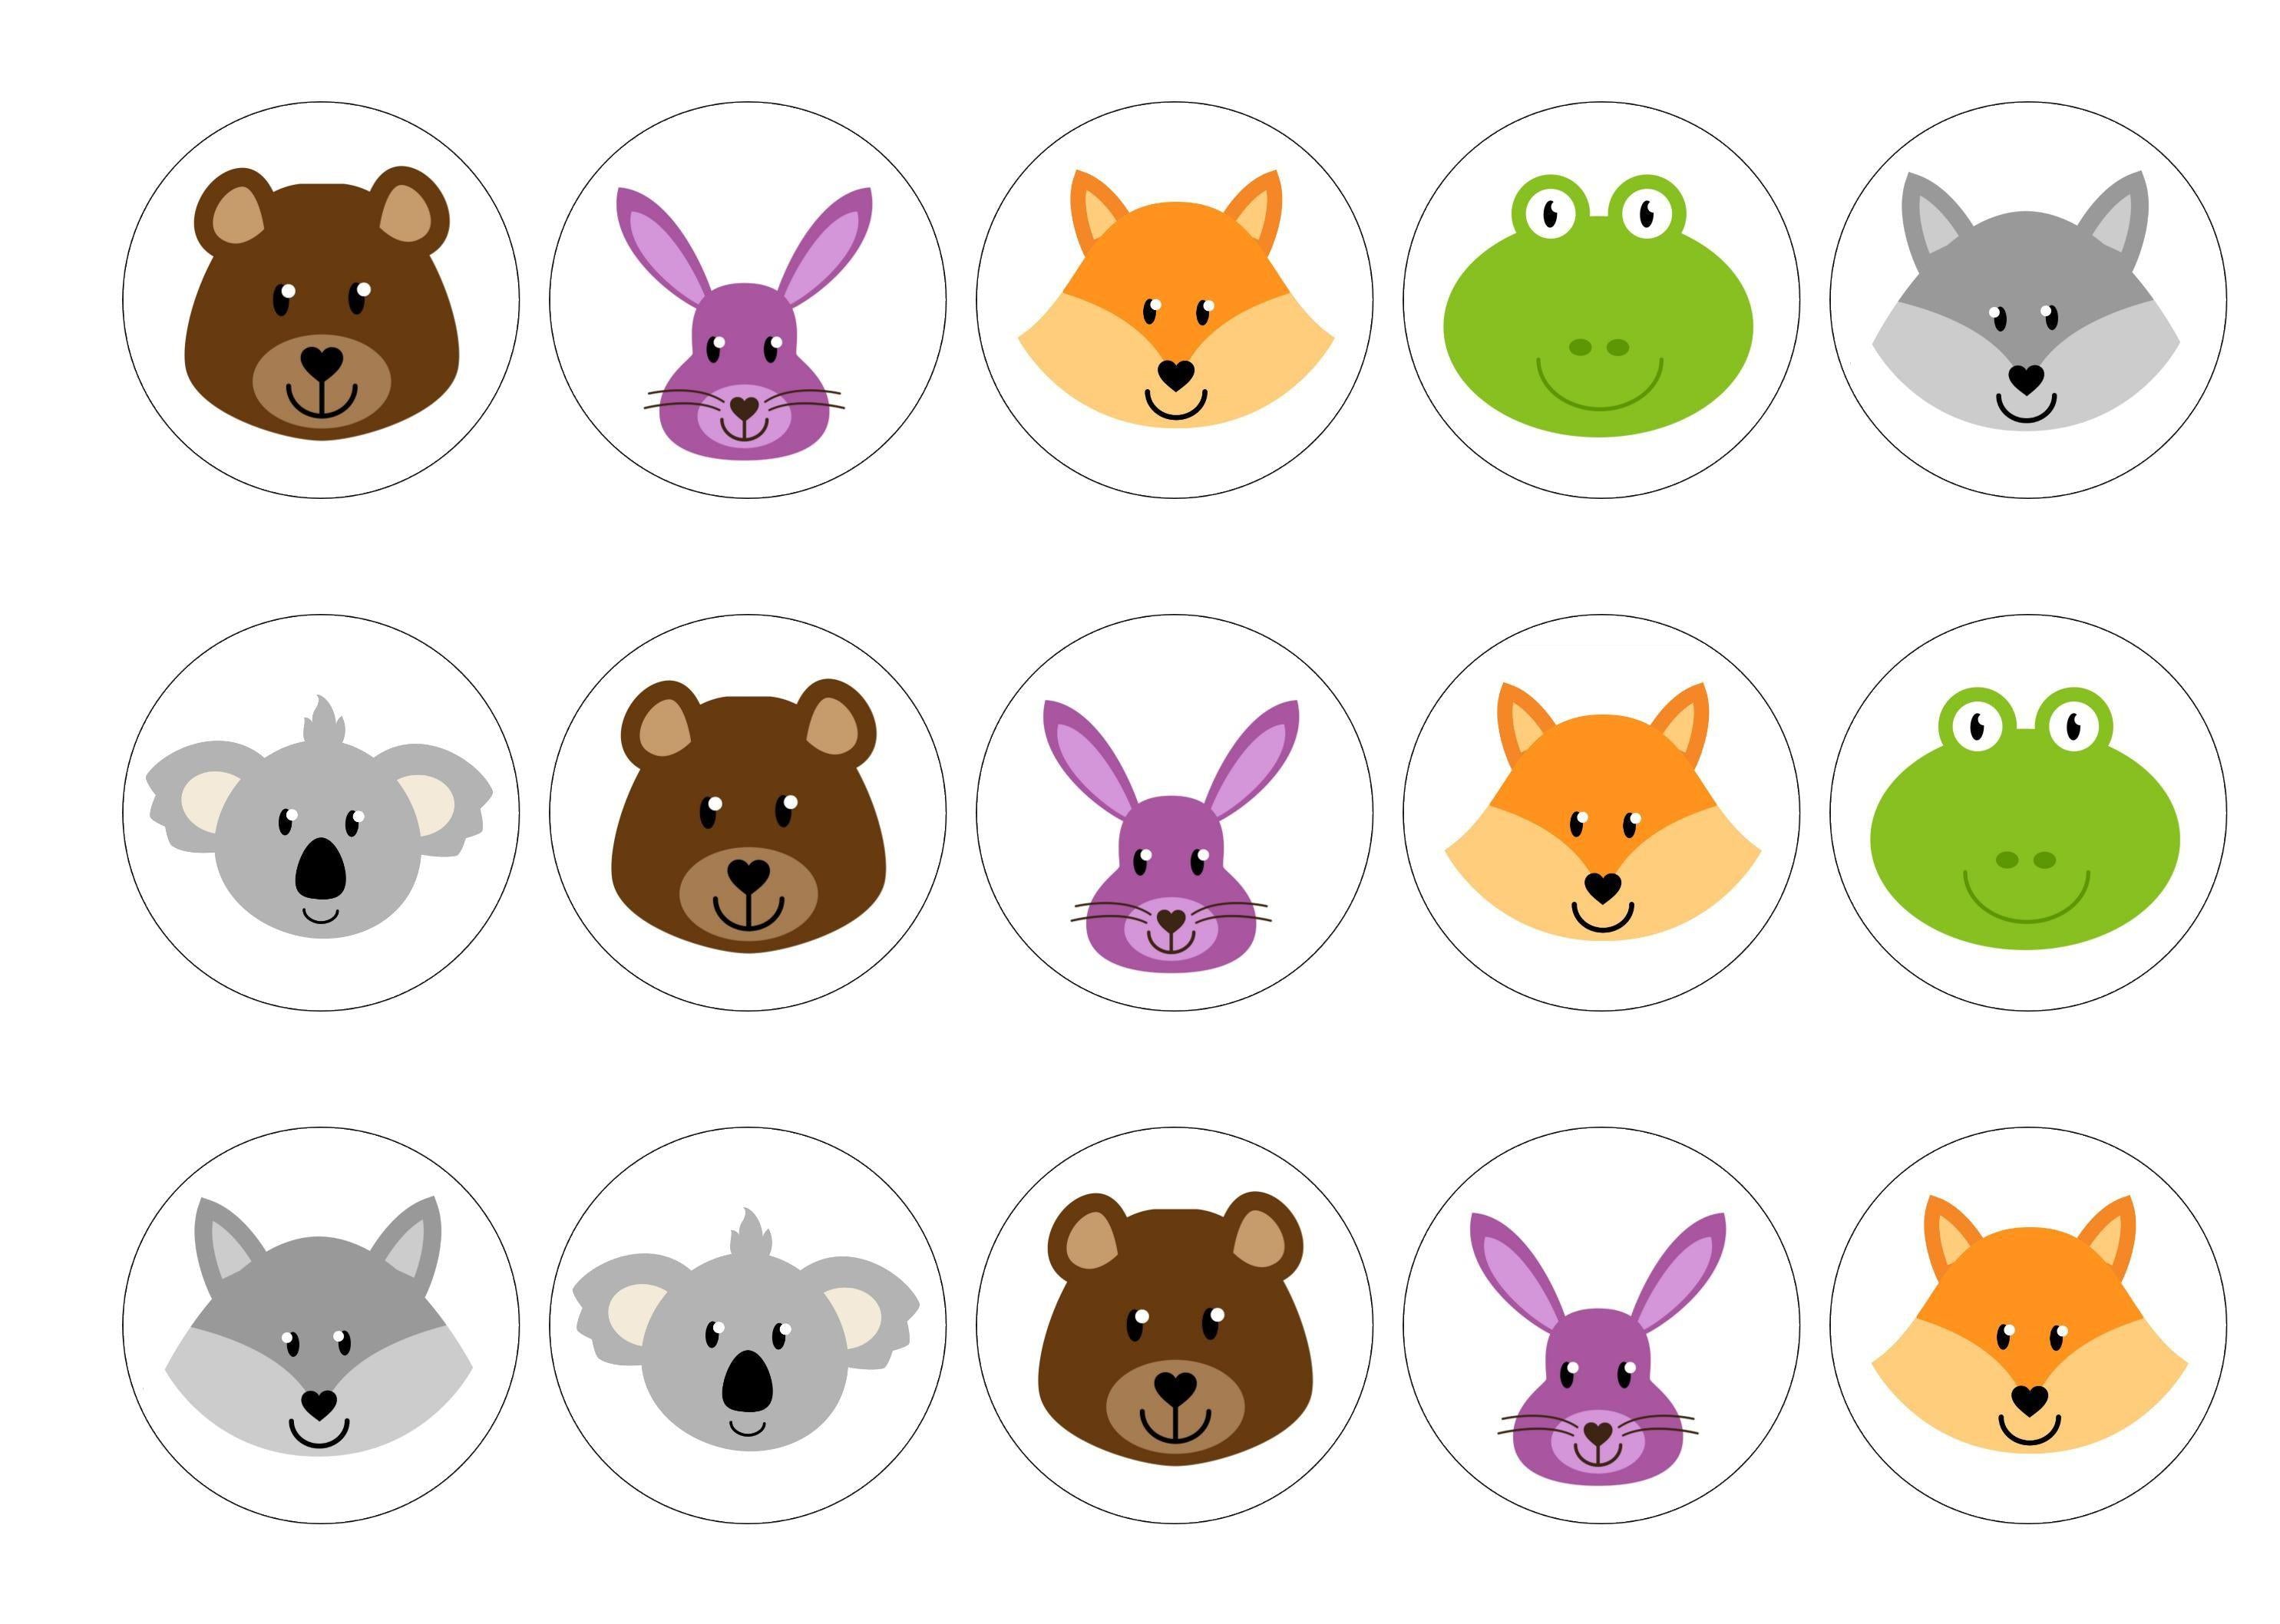 Printed edible cupcake toppers with woodland animals